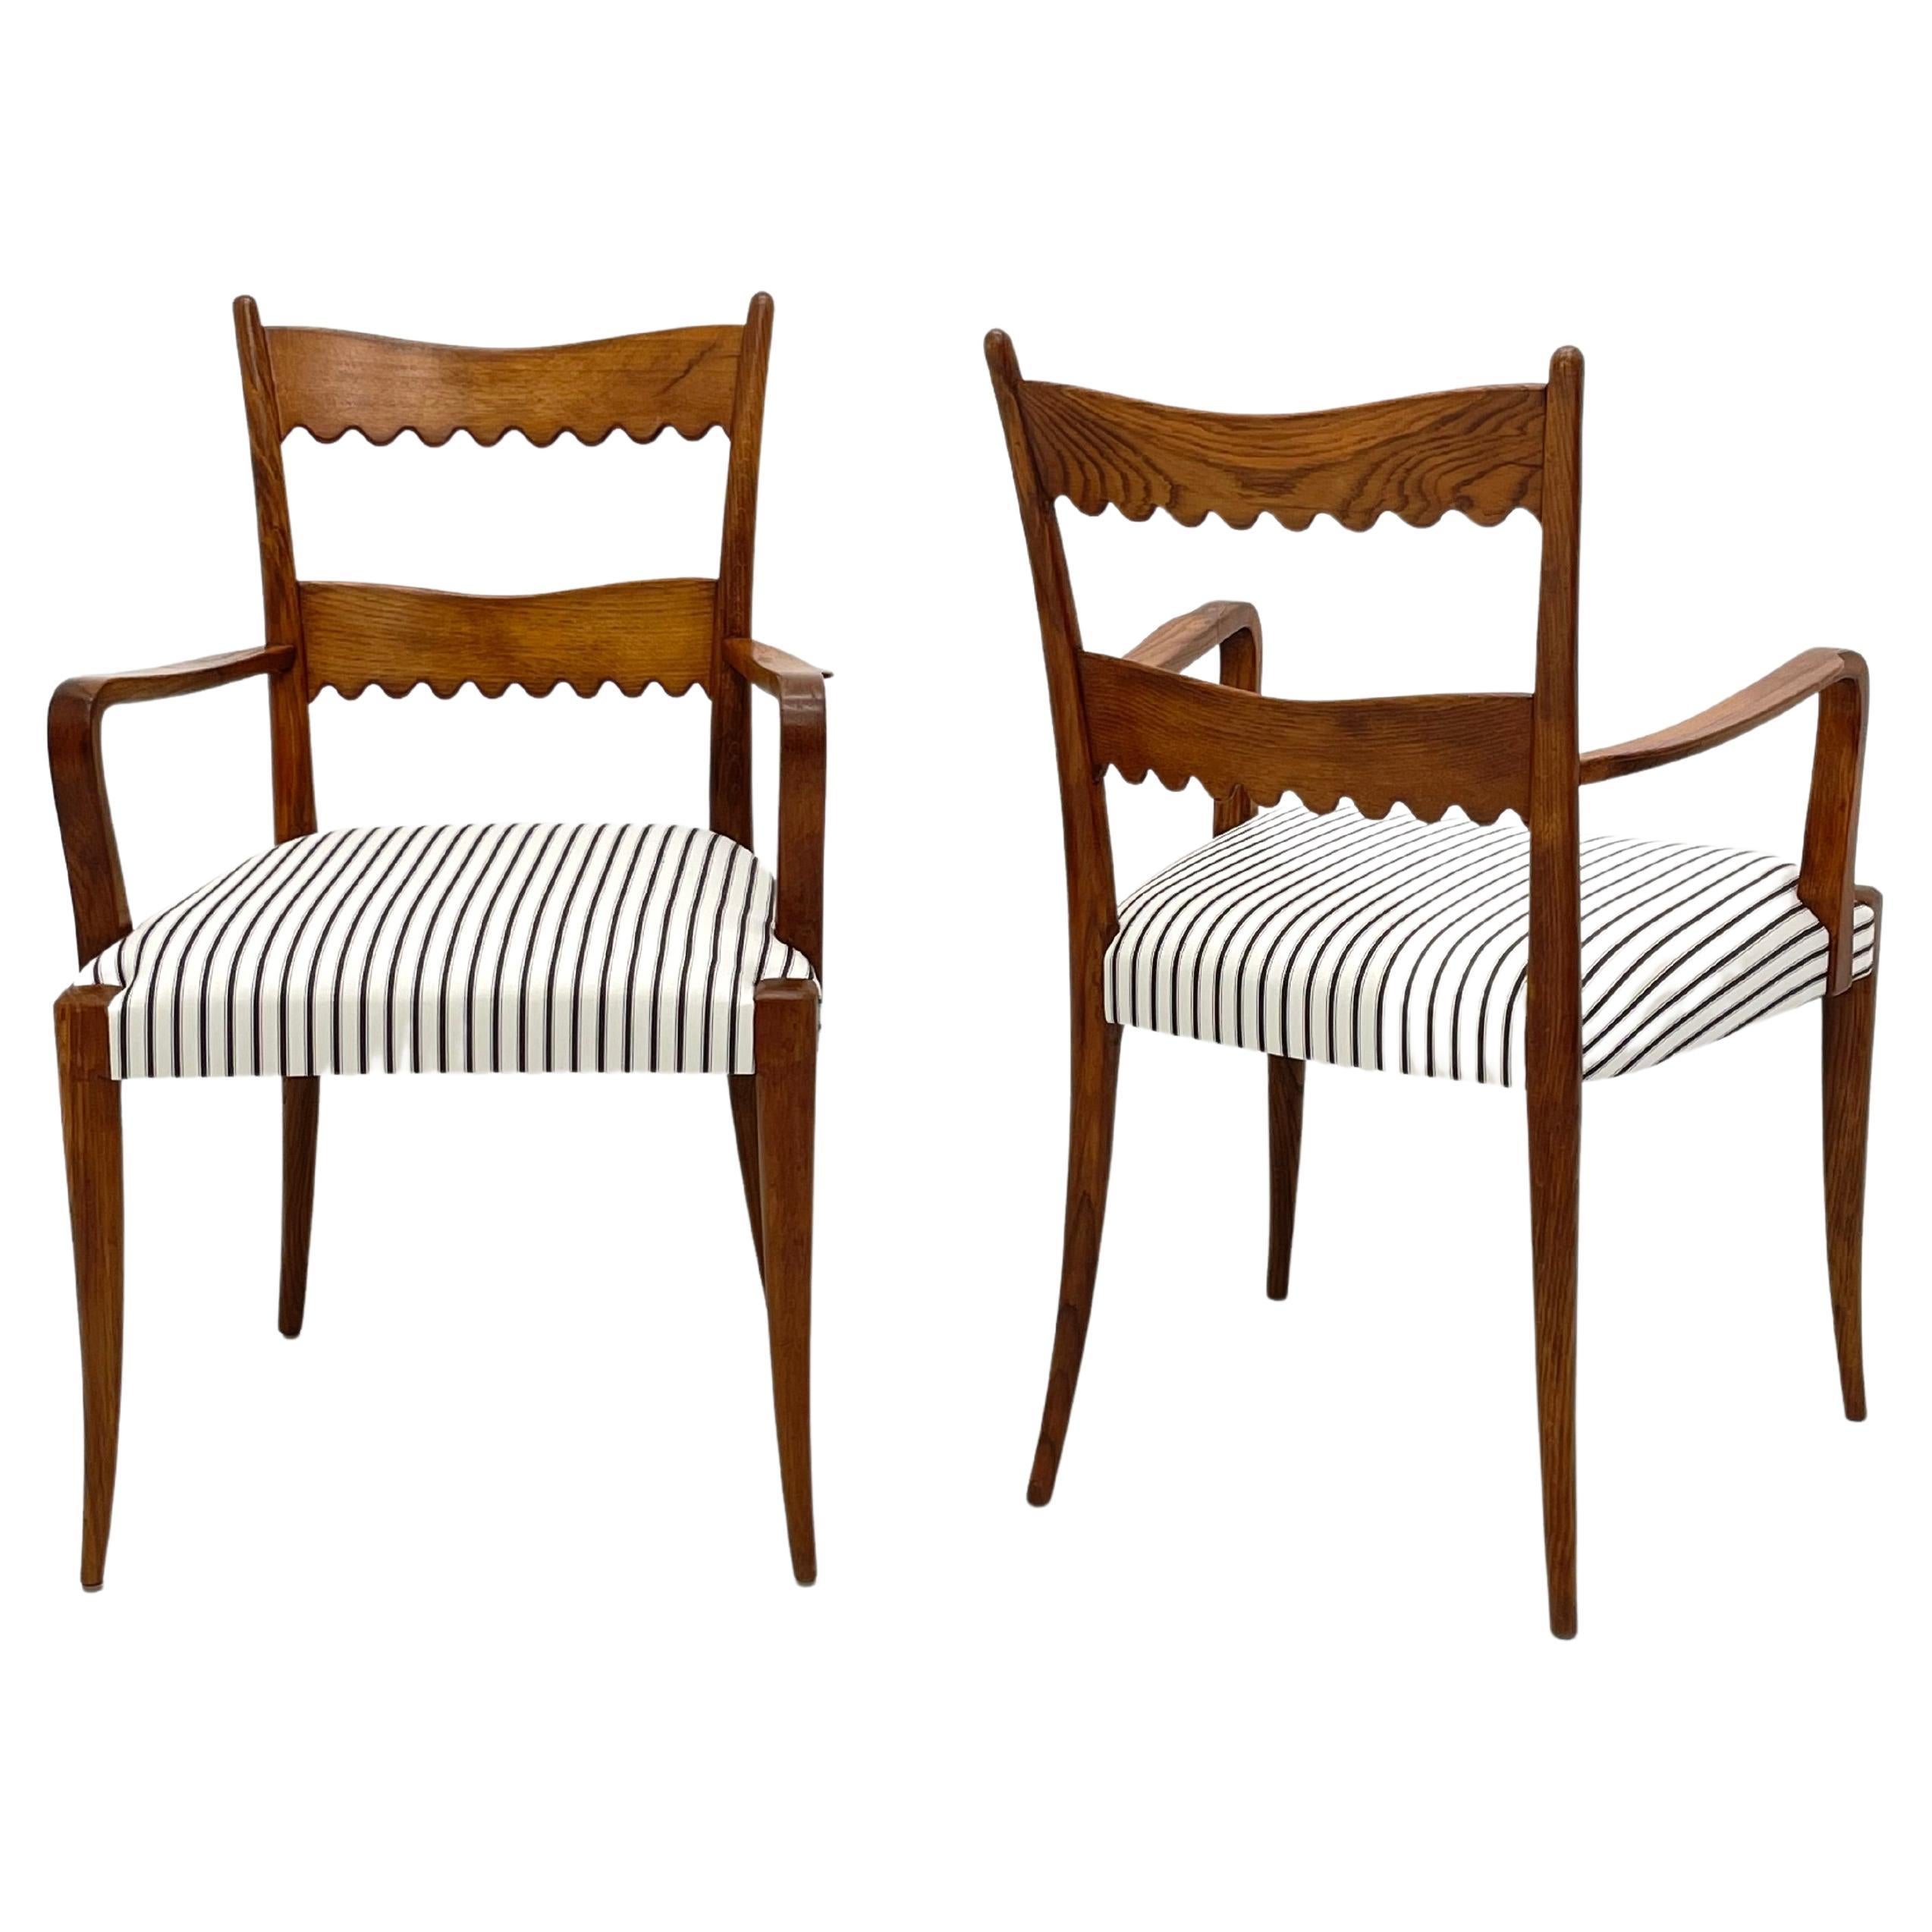 Pair of Scalloped back Armchairs, Paolo Buffa, Italy, 1940’s. 